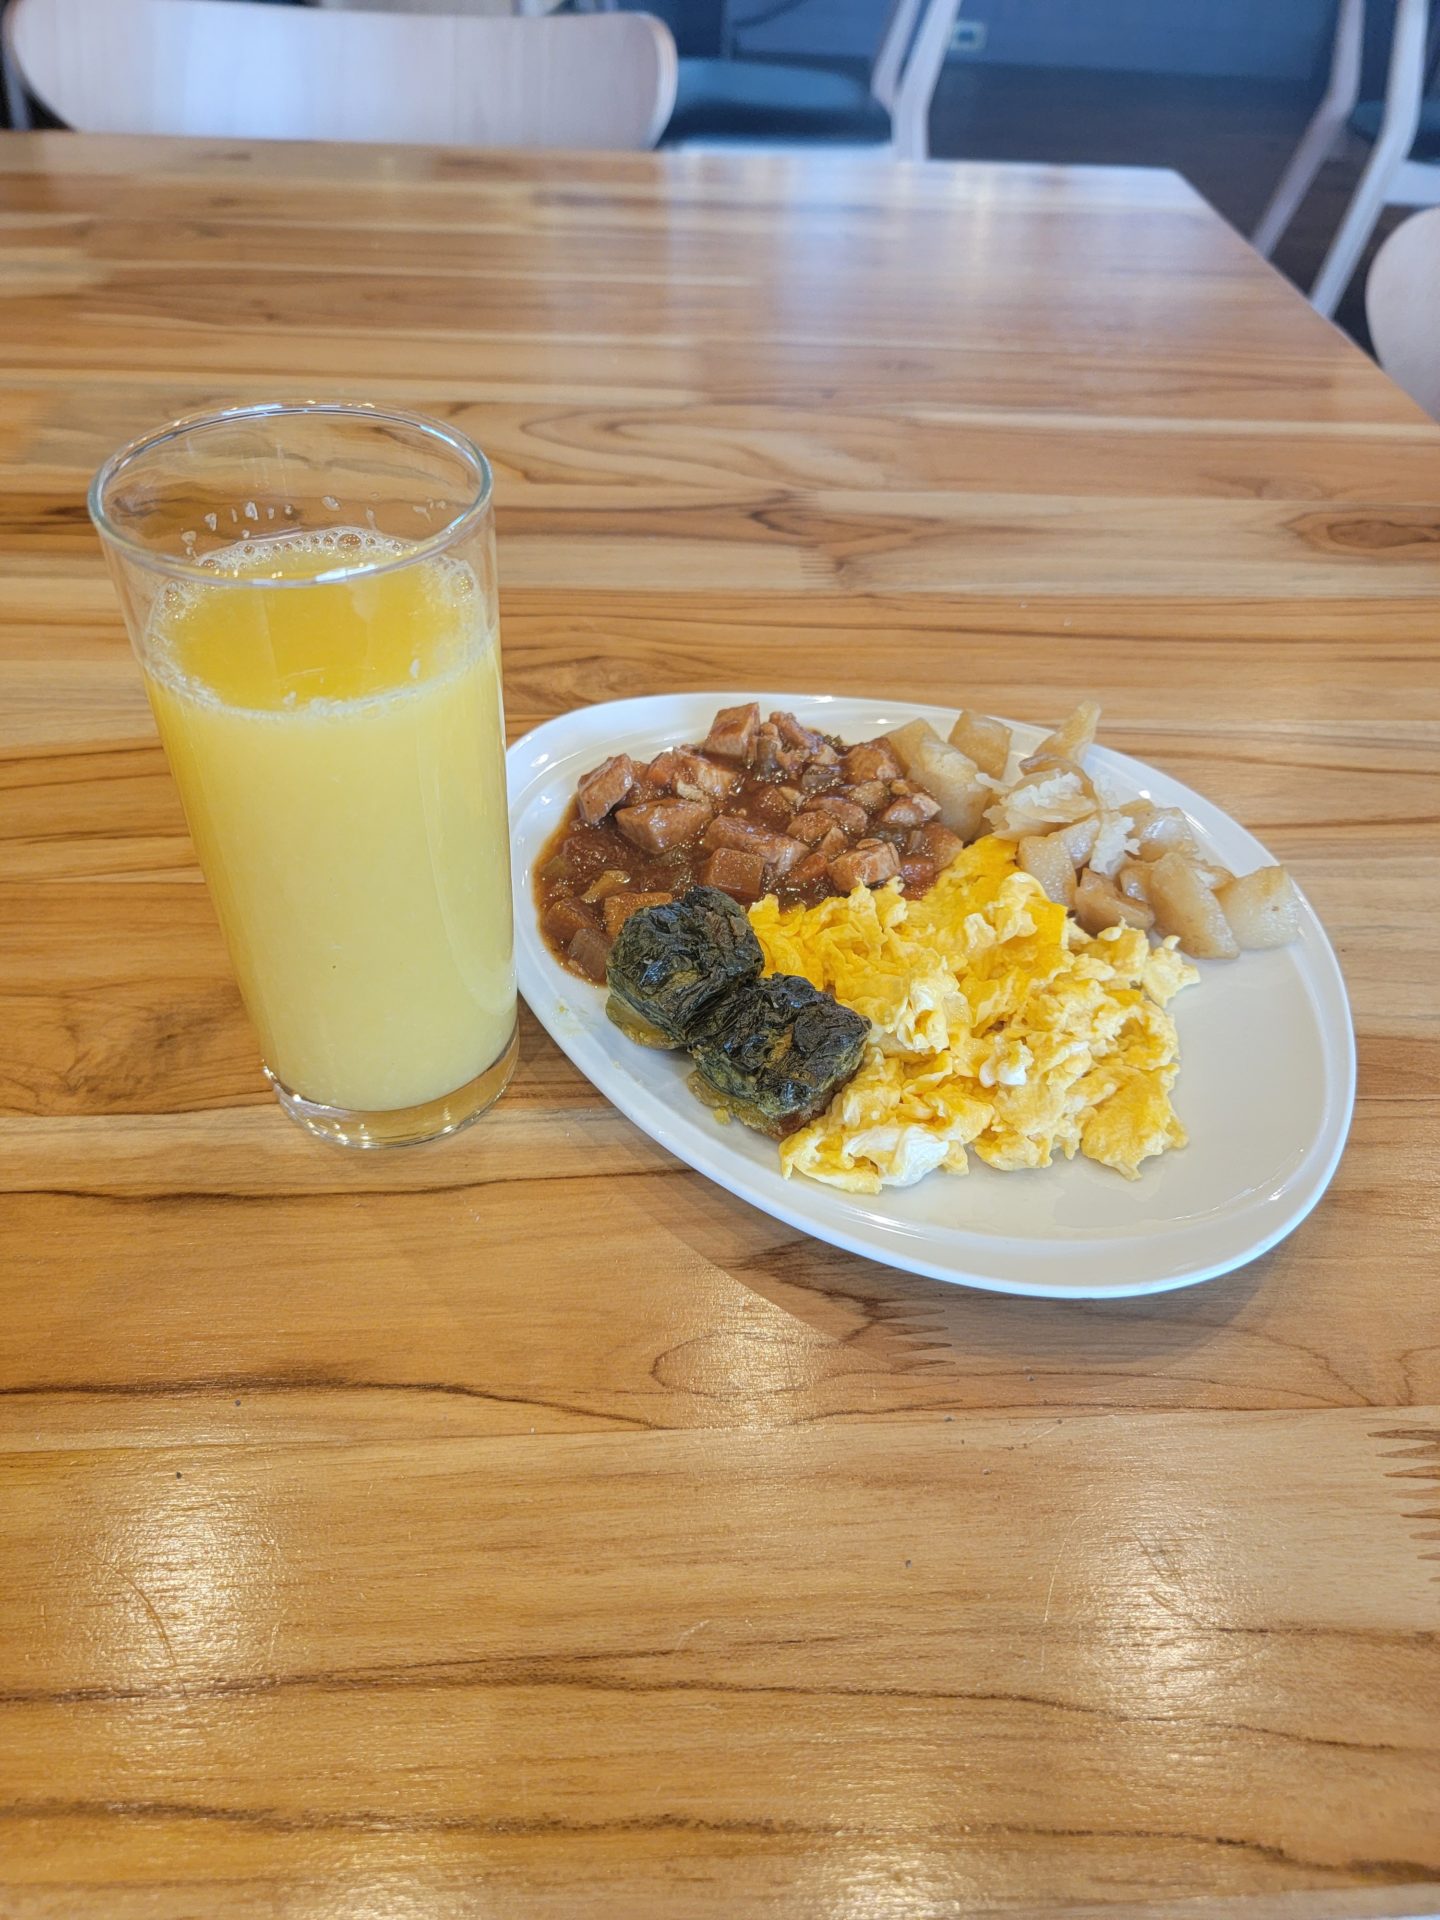 a plate of food and a glass of juice on a table